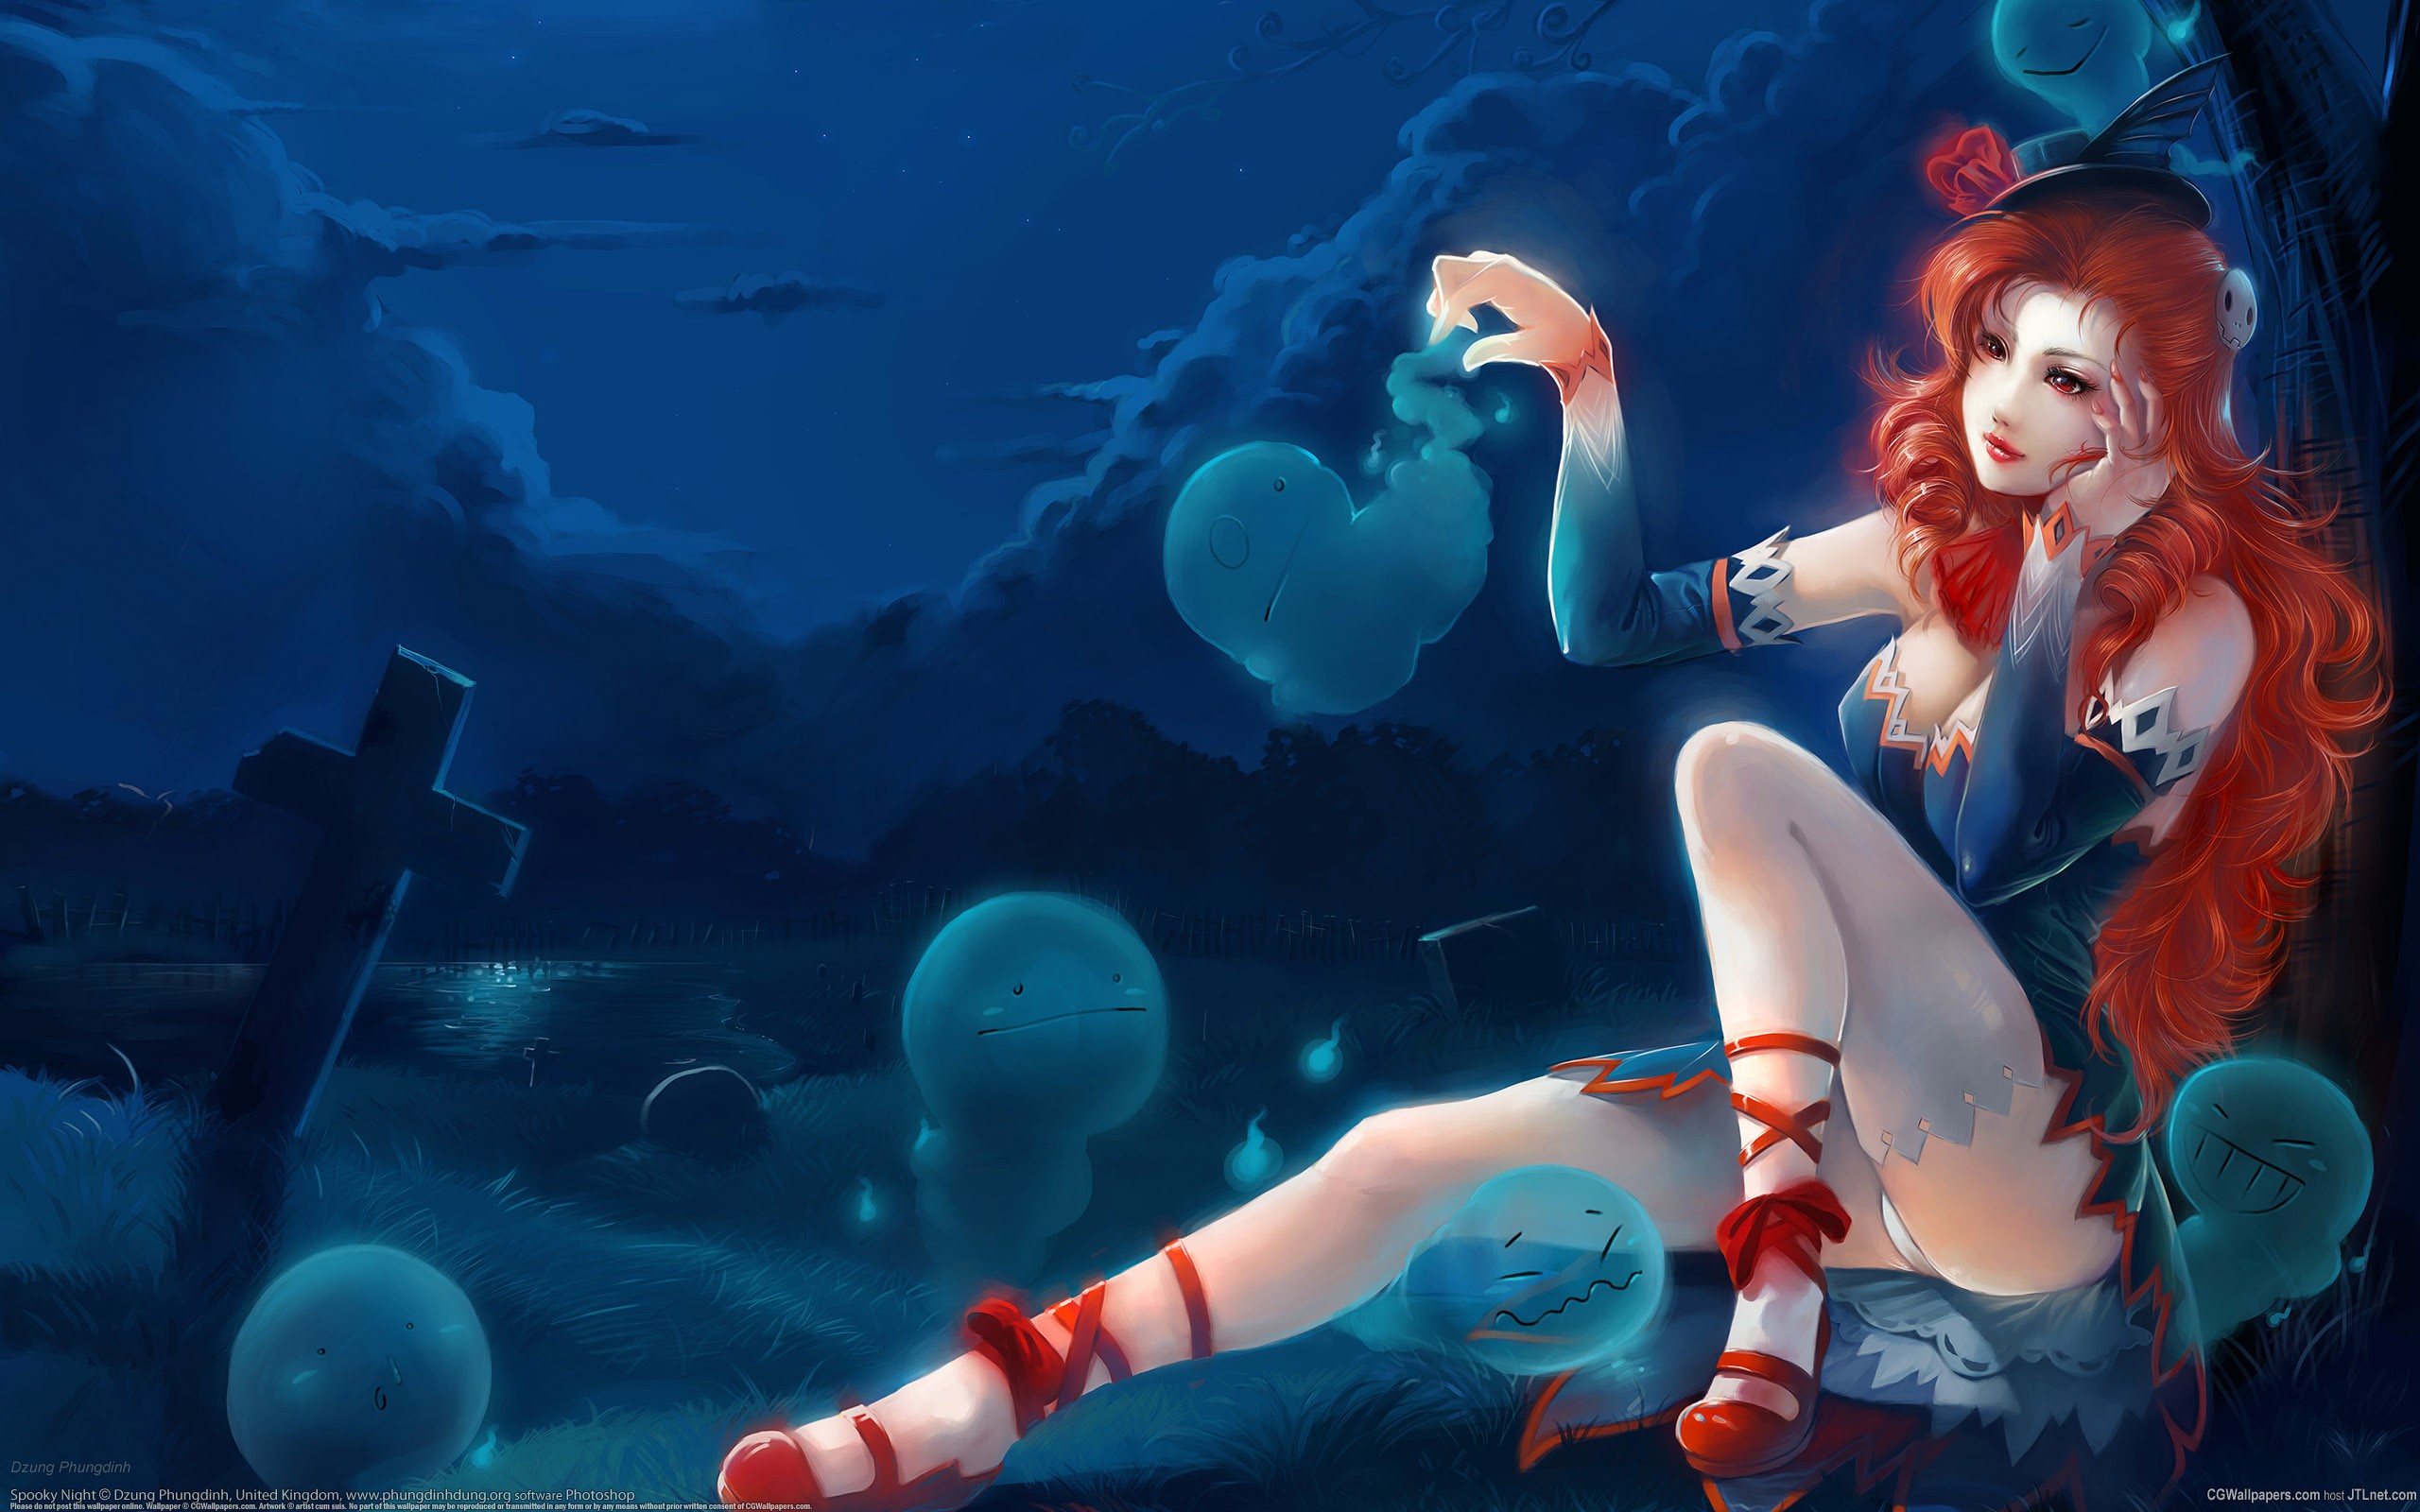 General 2560x1600 fantasy art artwork panties women redhead funny hats fantasy girl long hair red shoes red eyes red lipstick Dzung Phungdinh photoshopped